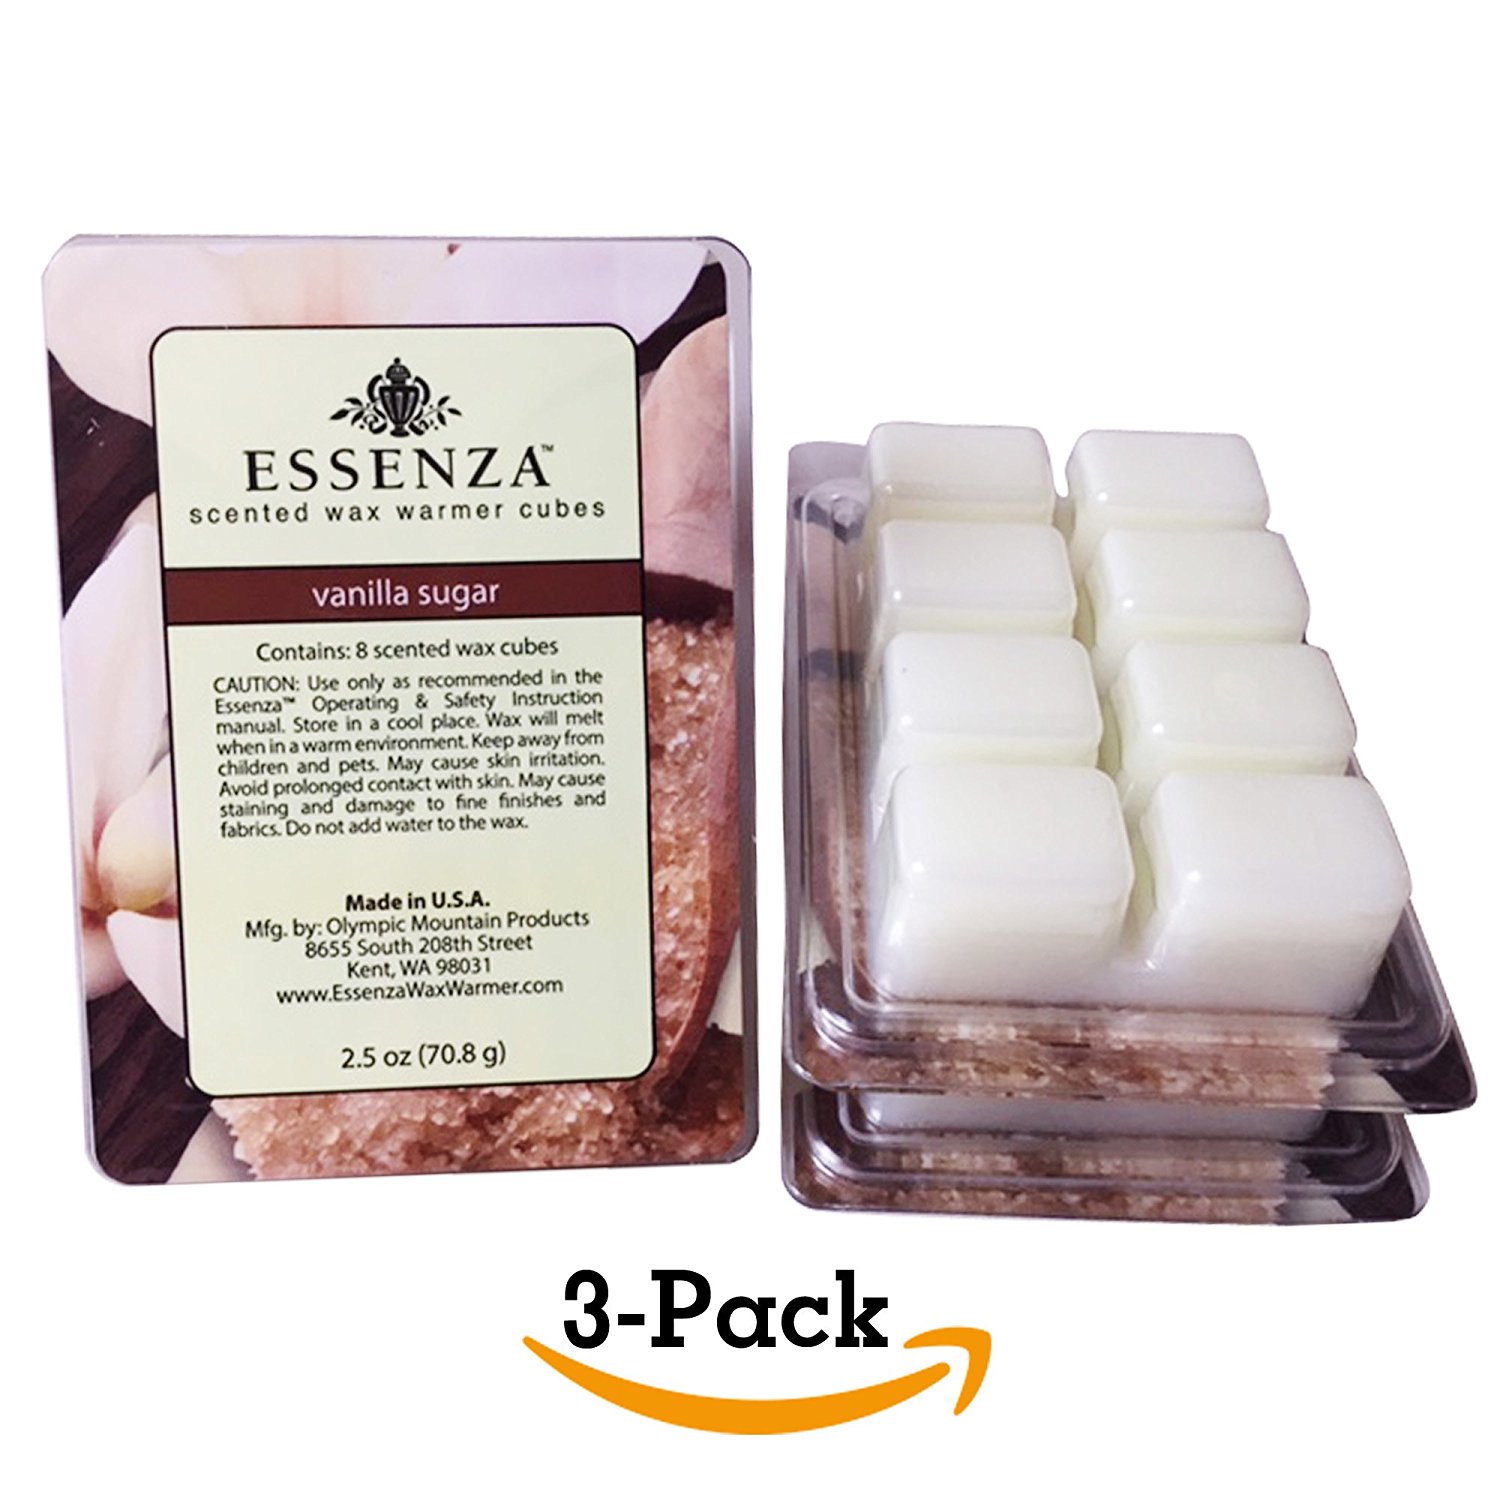 ESSENZA Scented Wax Warmer Cube Melts - 3-Pack - Best Home Products